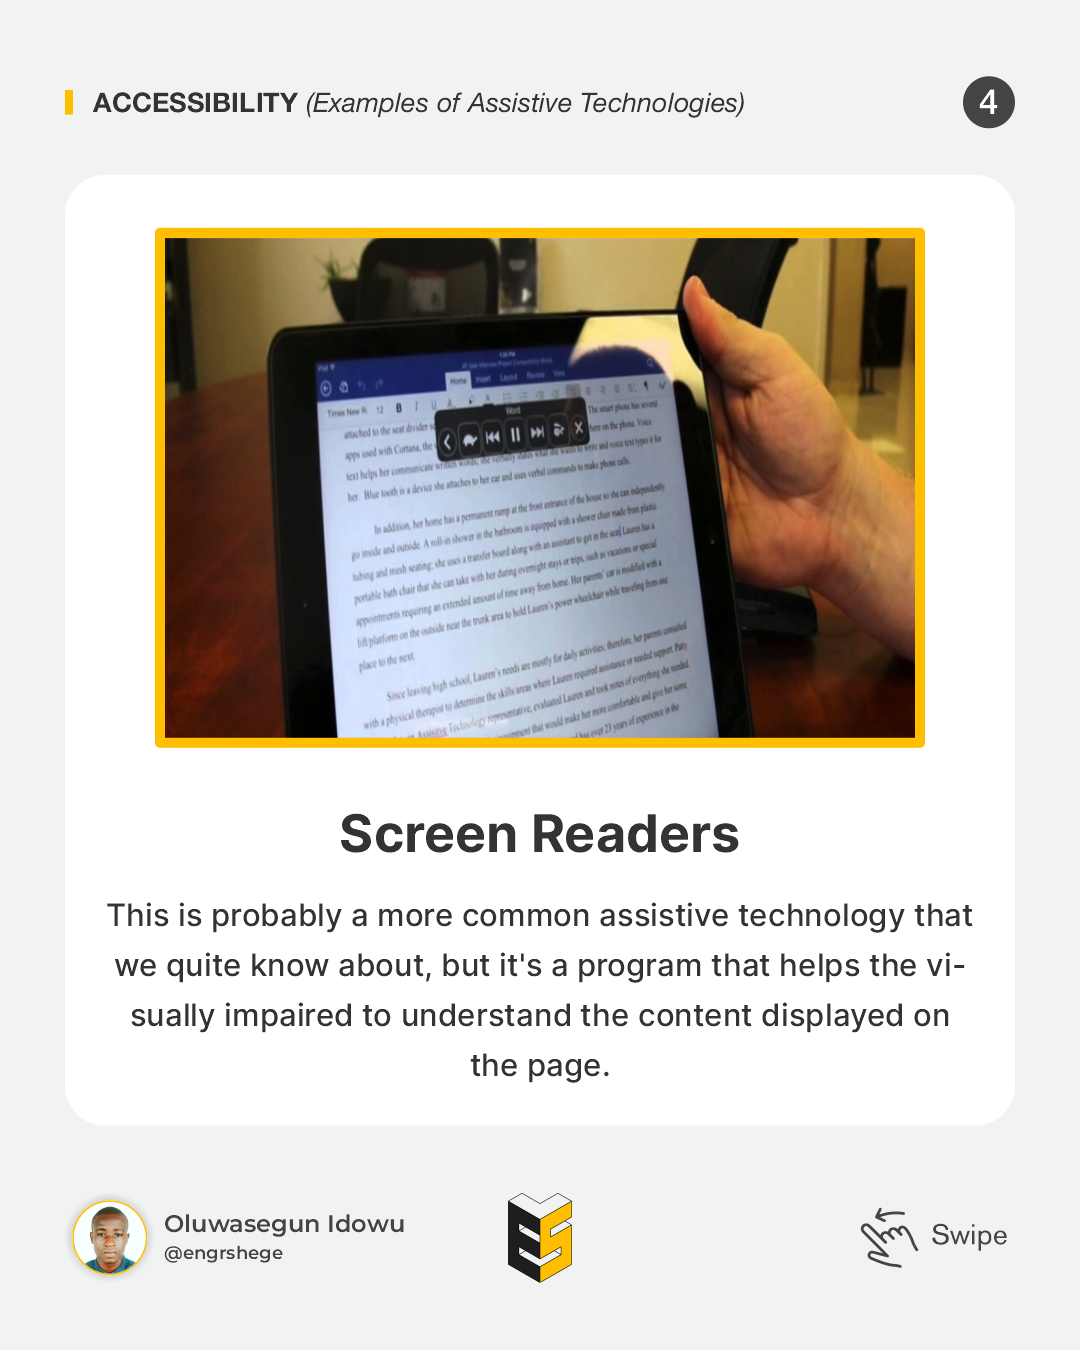 4. Examples of Assistive Technologies (Screen Reader)